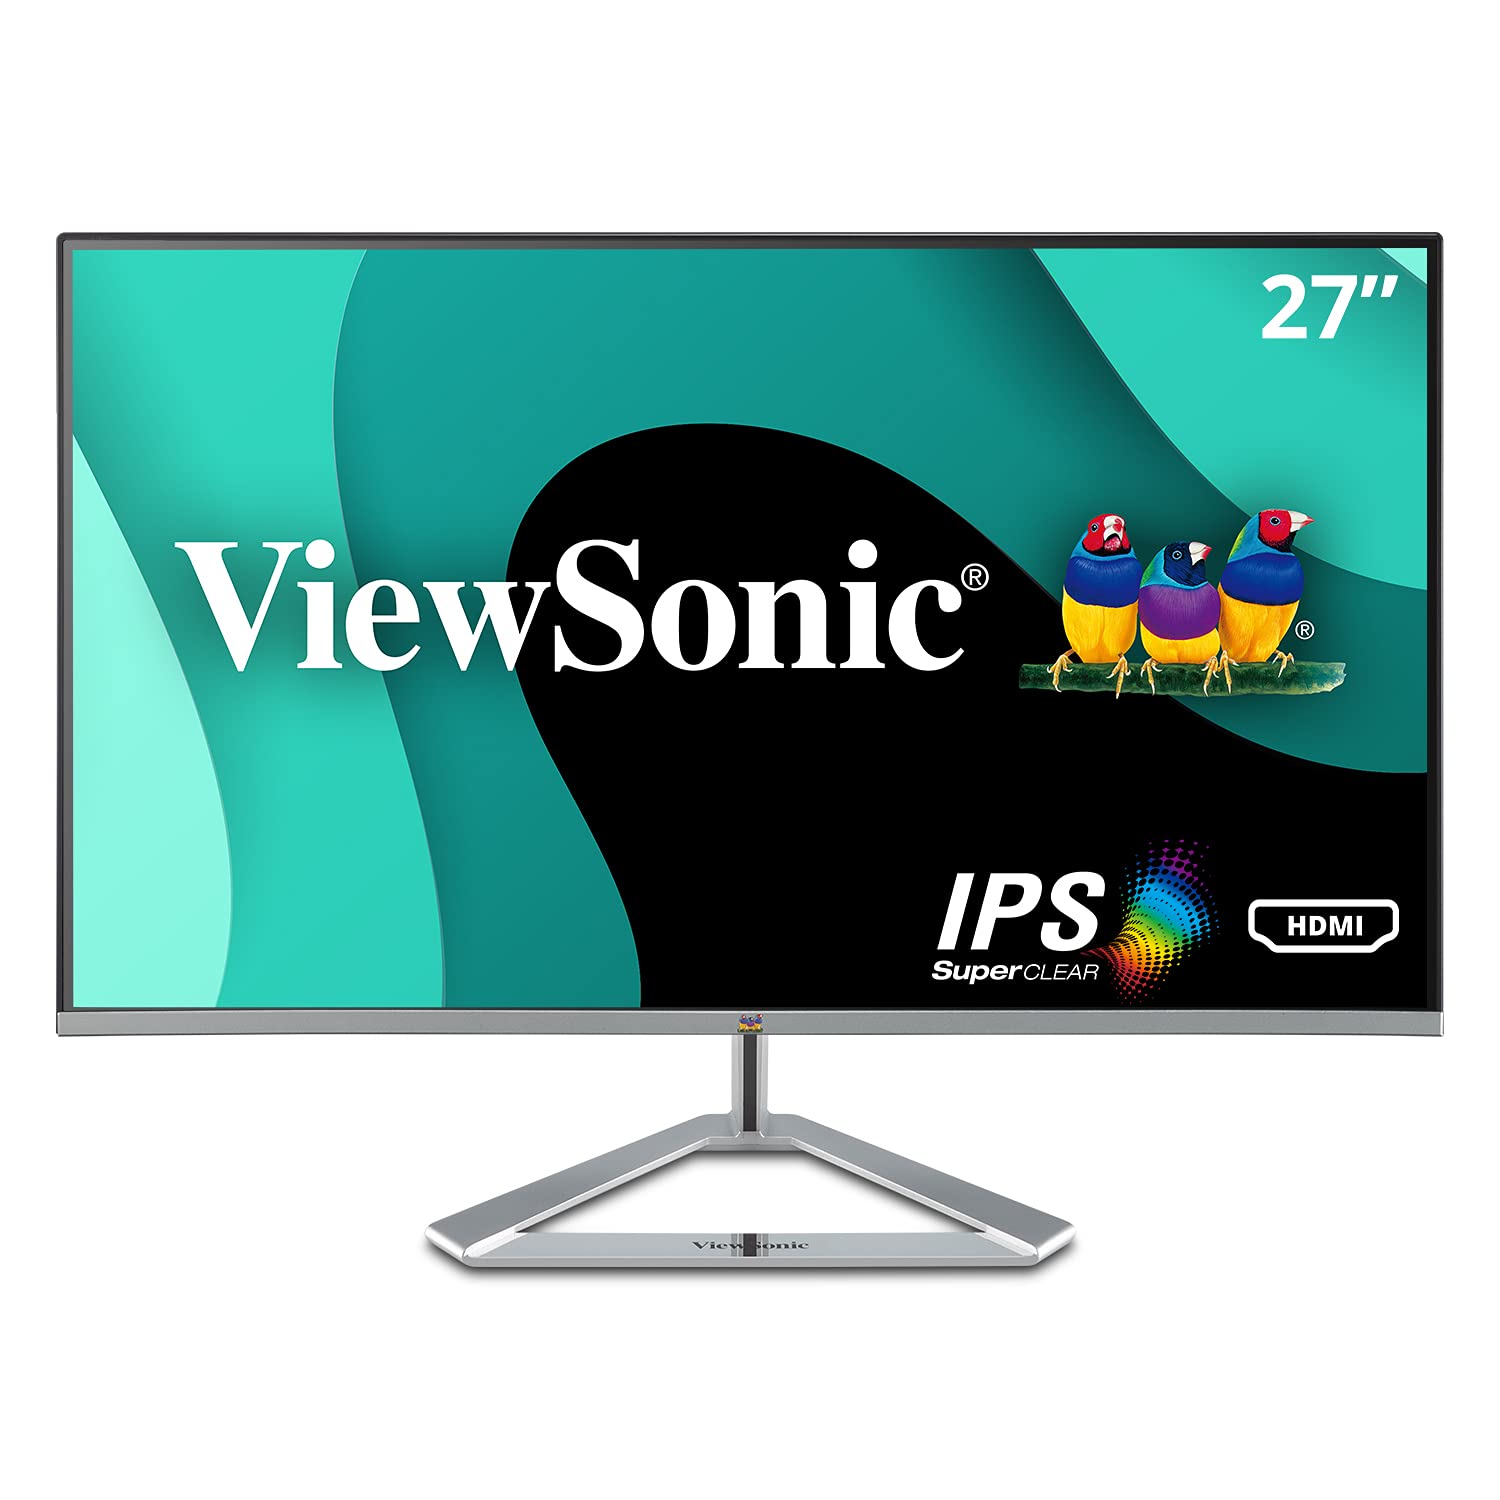 ViewSonic VX2776-SMHD 27 Inch 1080p Widescreen IPS Monitor with Ultra-Thin Bezels, HDMI and DisplayPort, blue, 24.5 x 18.2 x 8.2